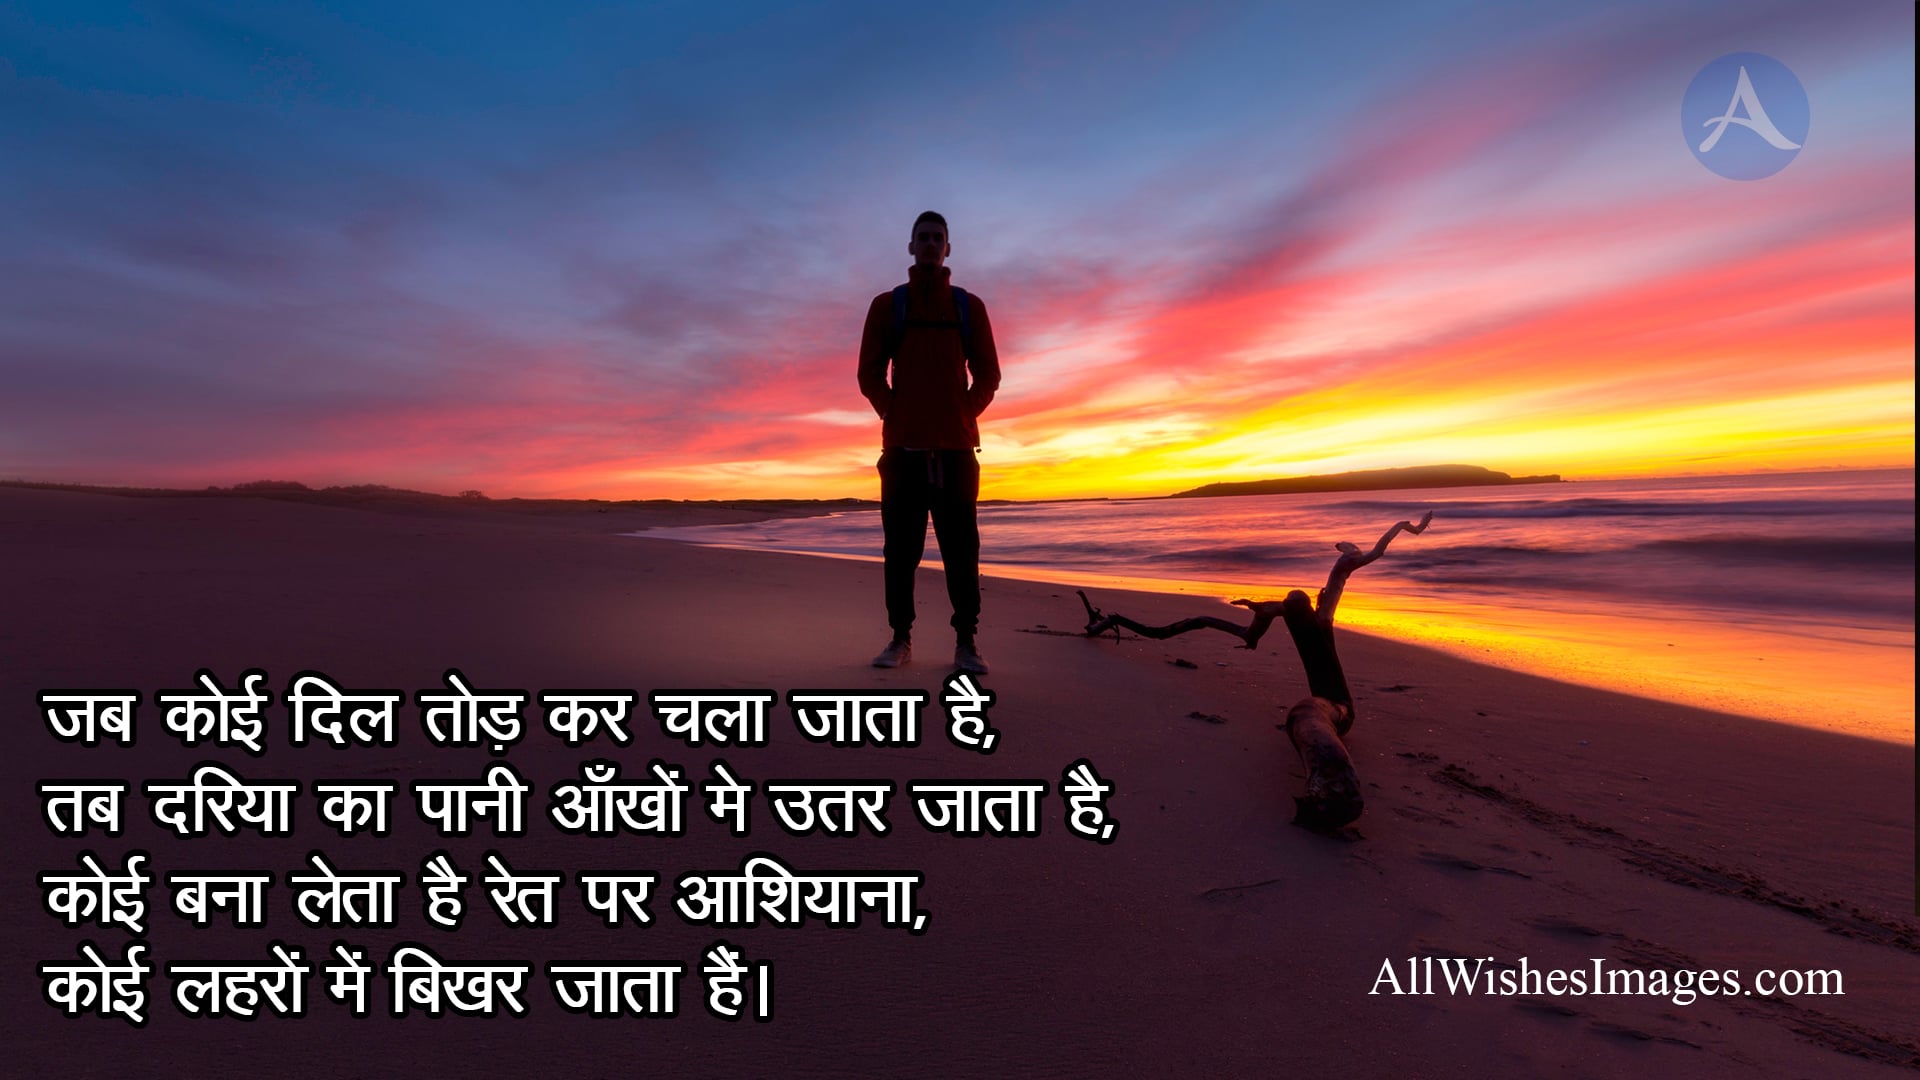 Sad Love Shayari - All Wishes Images - Images for WhatsApp